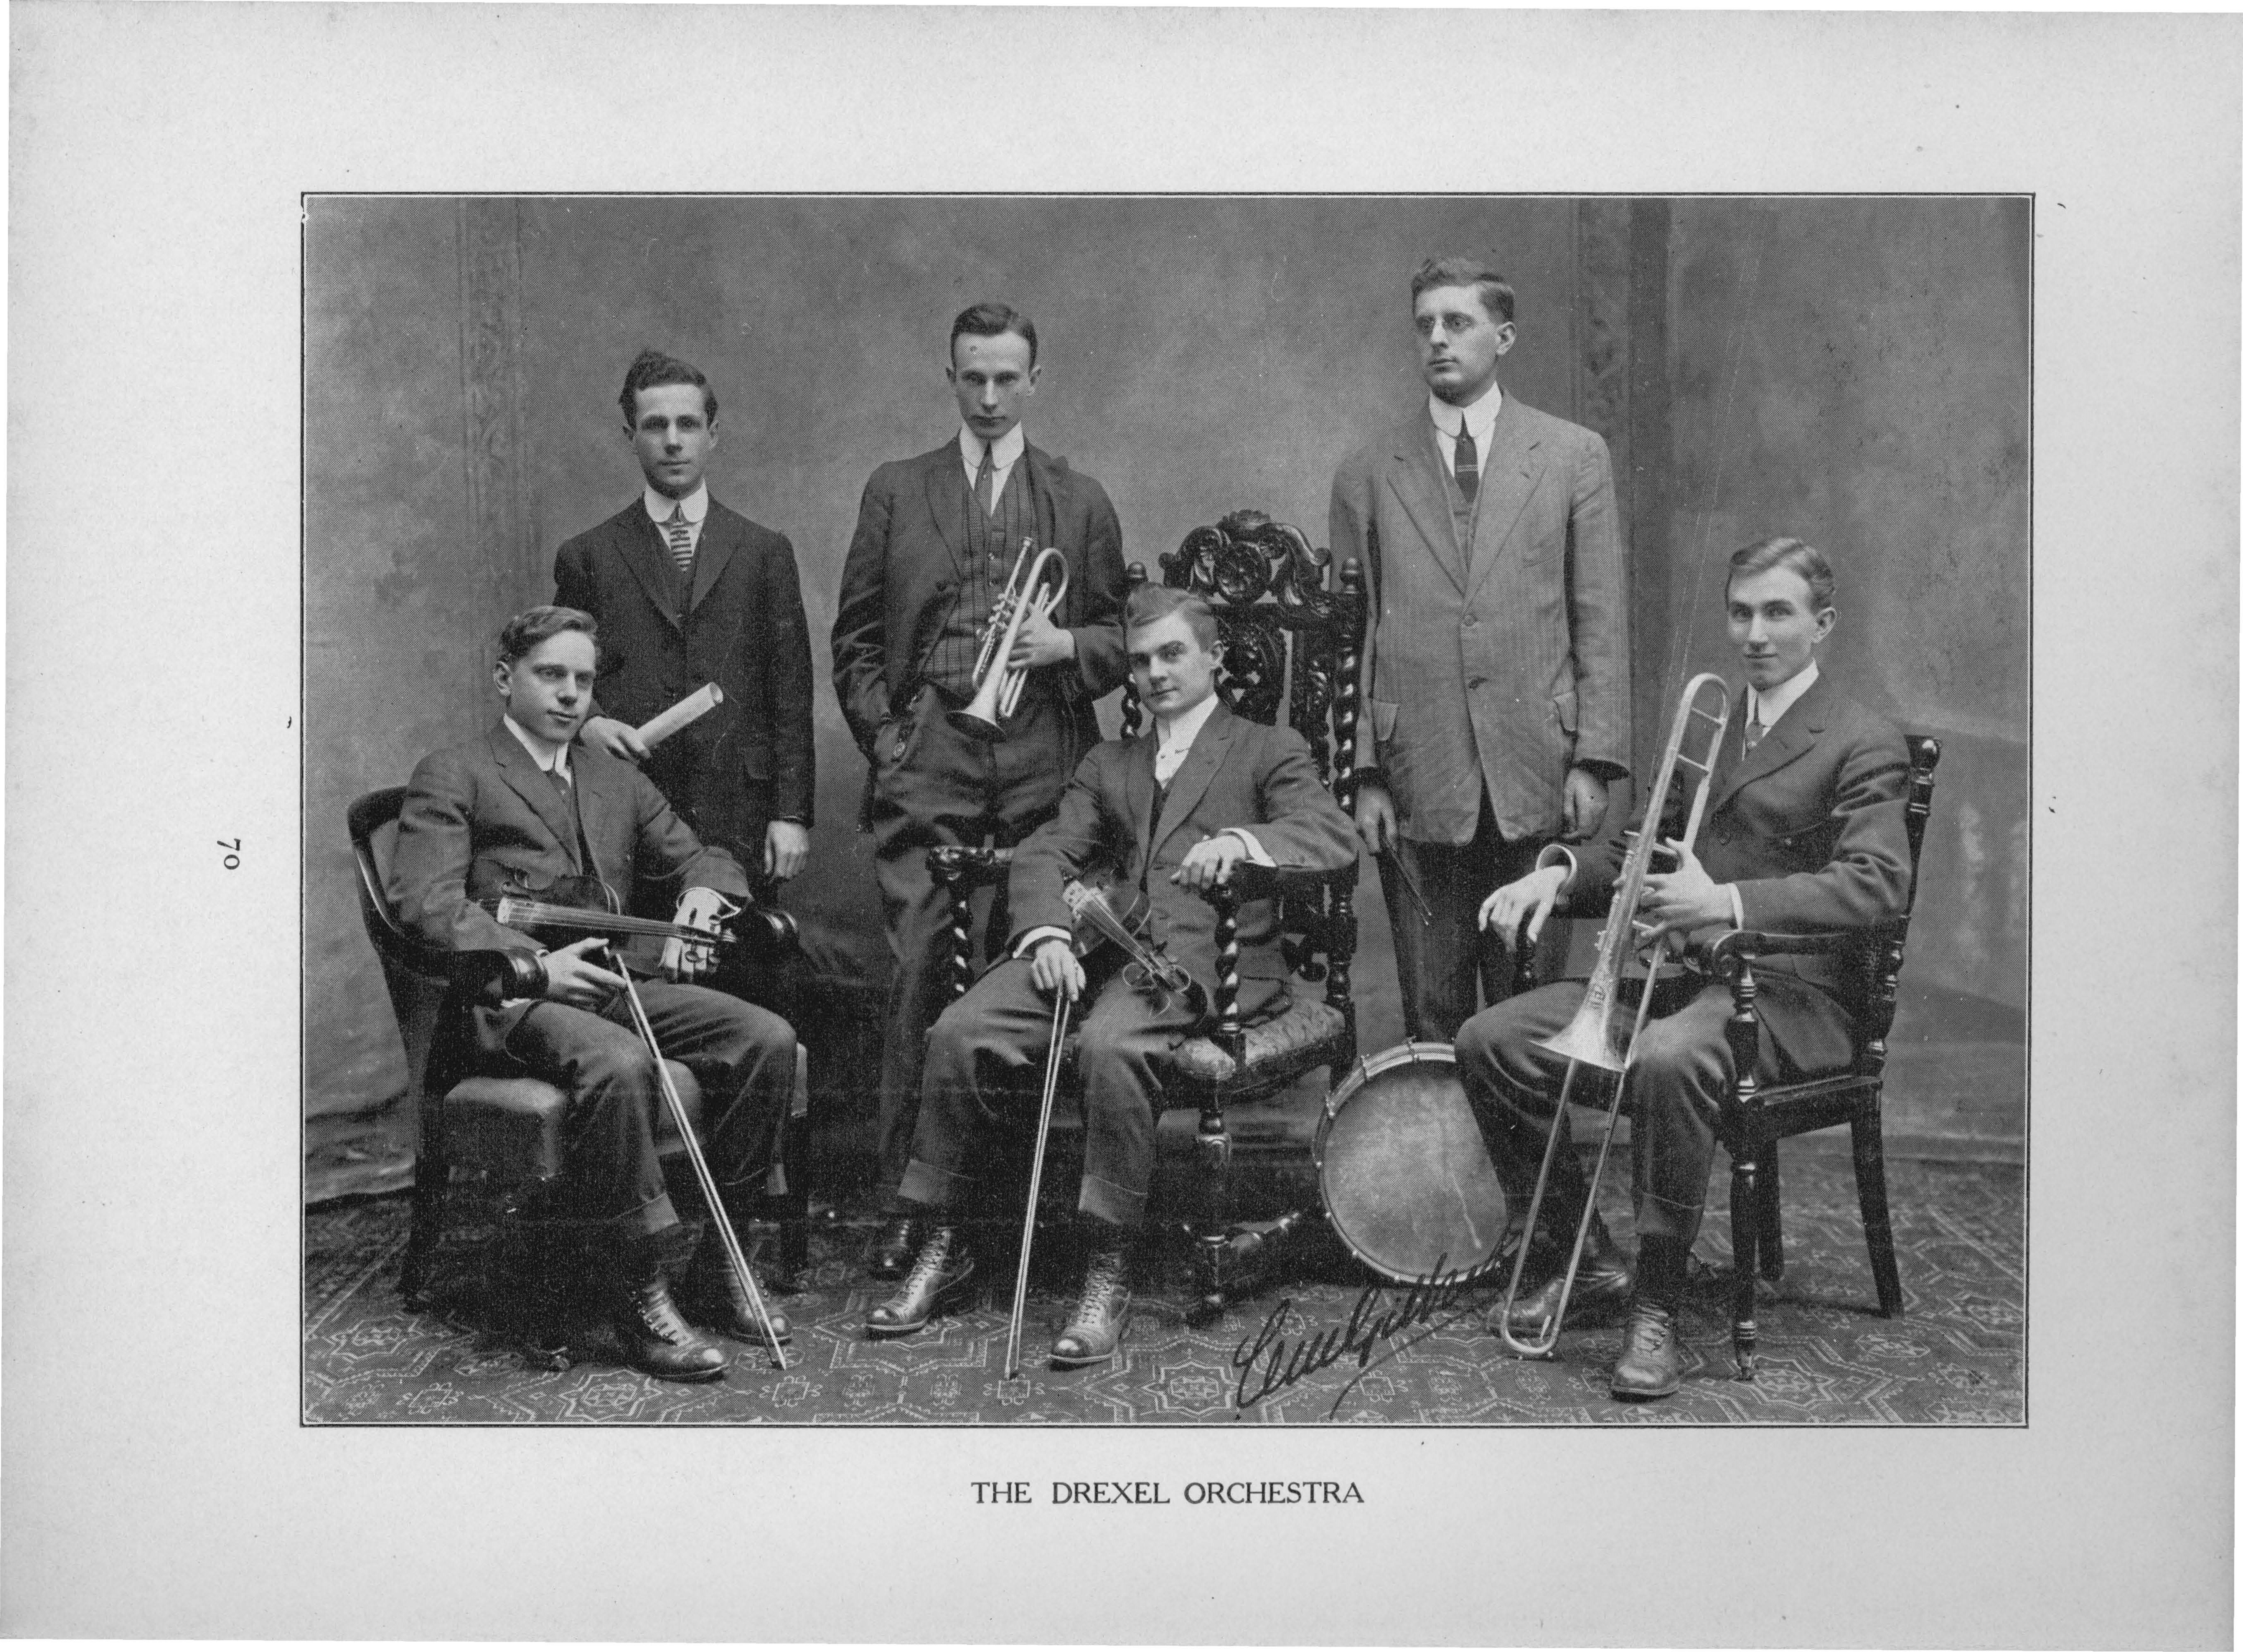 Six men stand in a semi-circle holding a variety of instruments